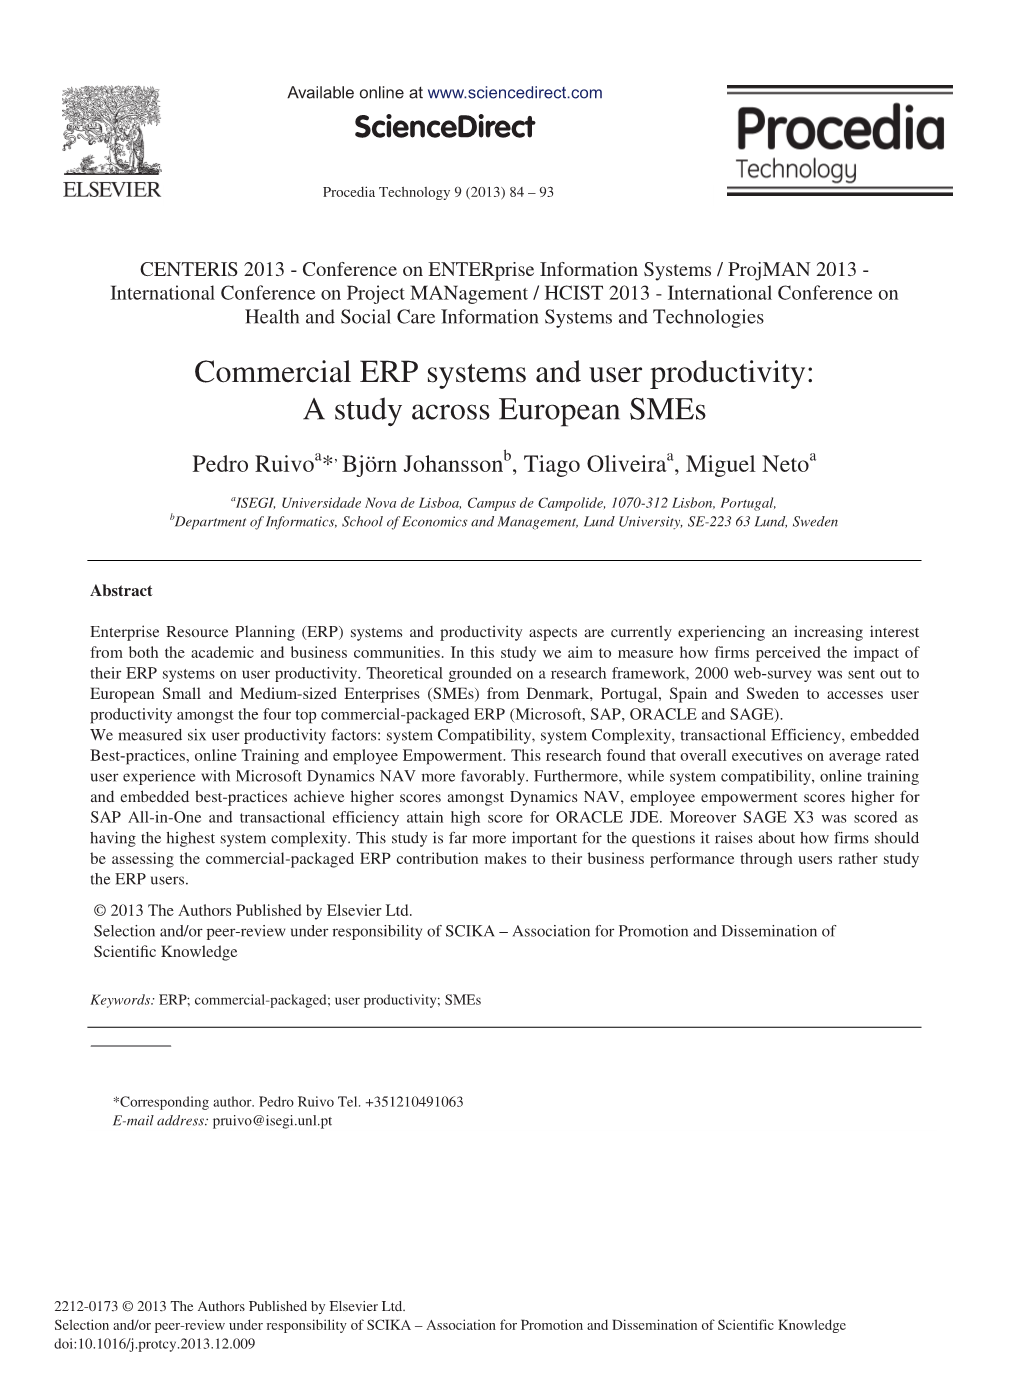 Commercial ERP Systems and User Productivity: a Study Across European Smes